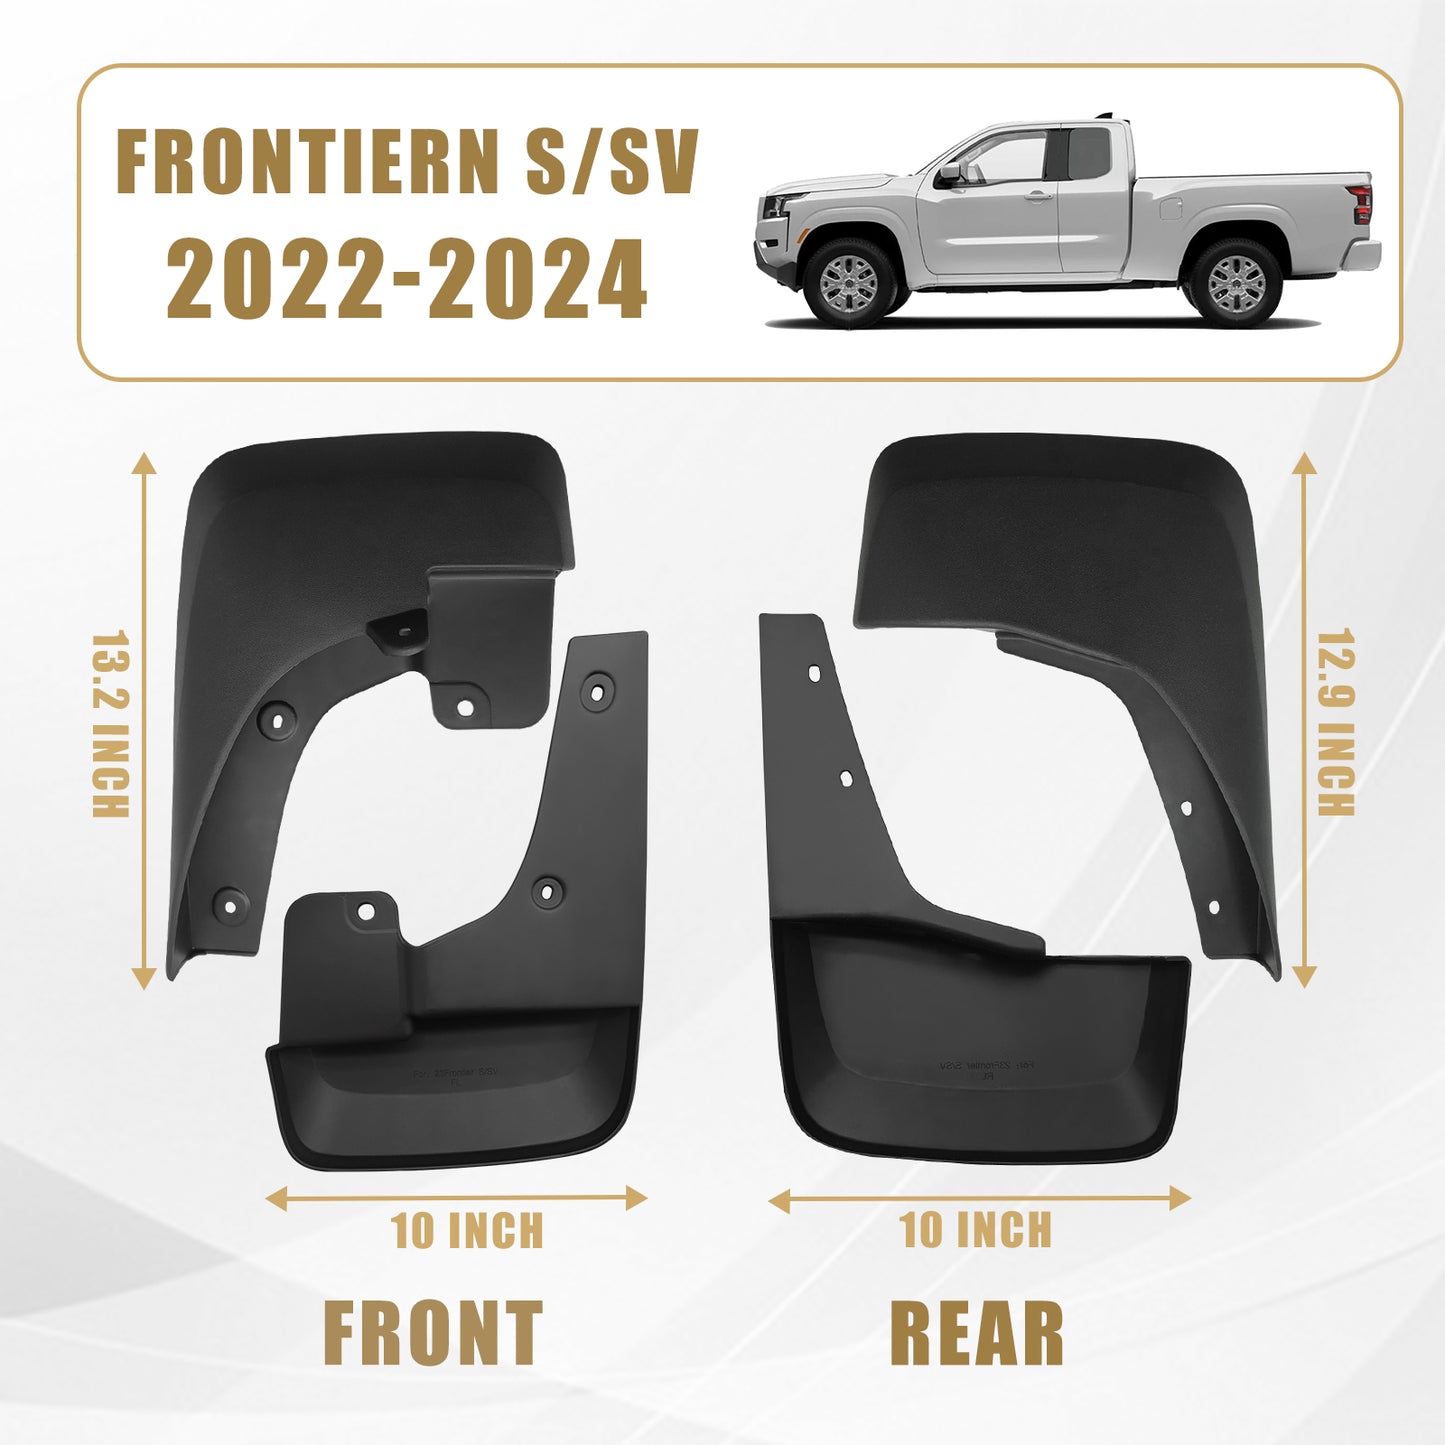 Mud Flaps for Nissan Frontier 2022-2024 [ S/SV ]